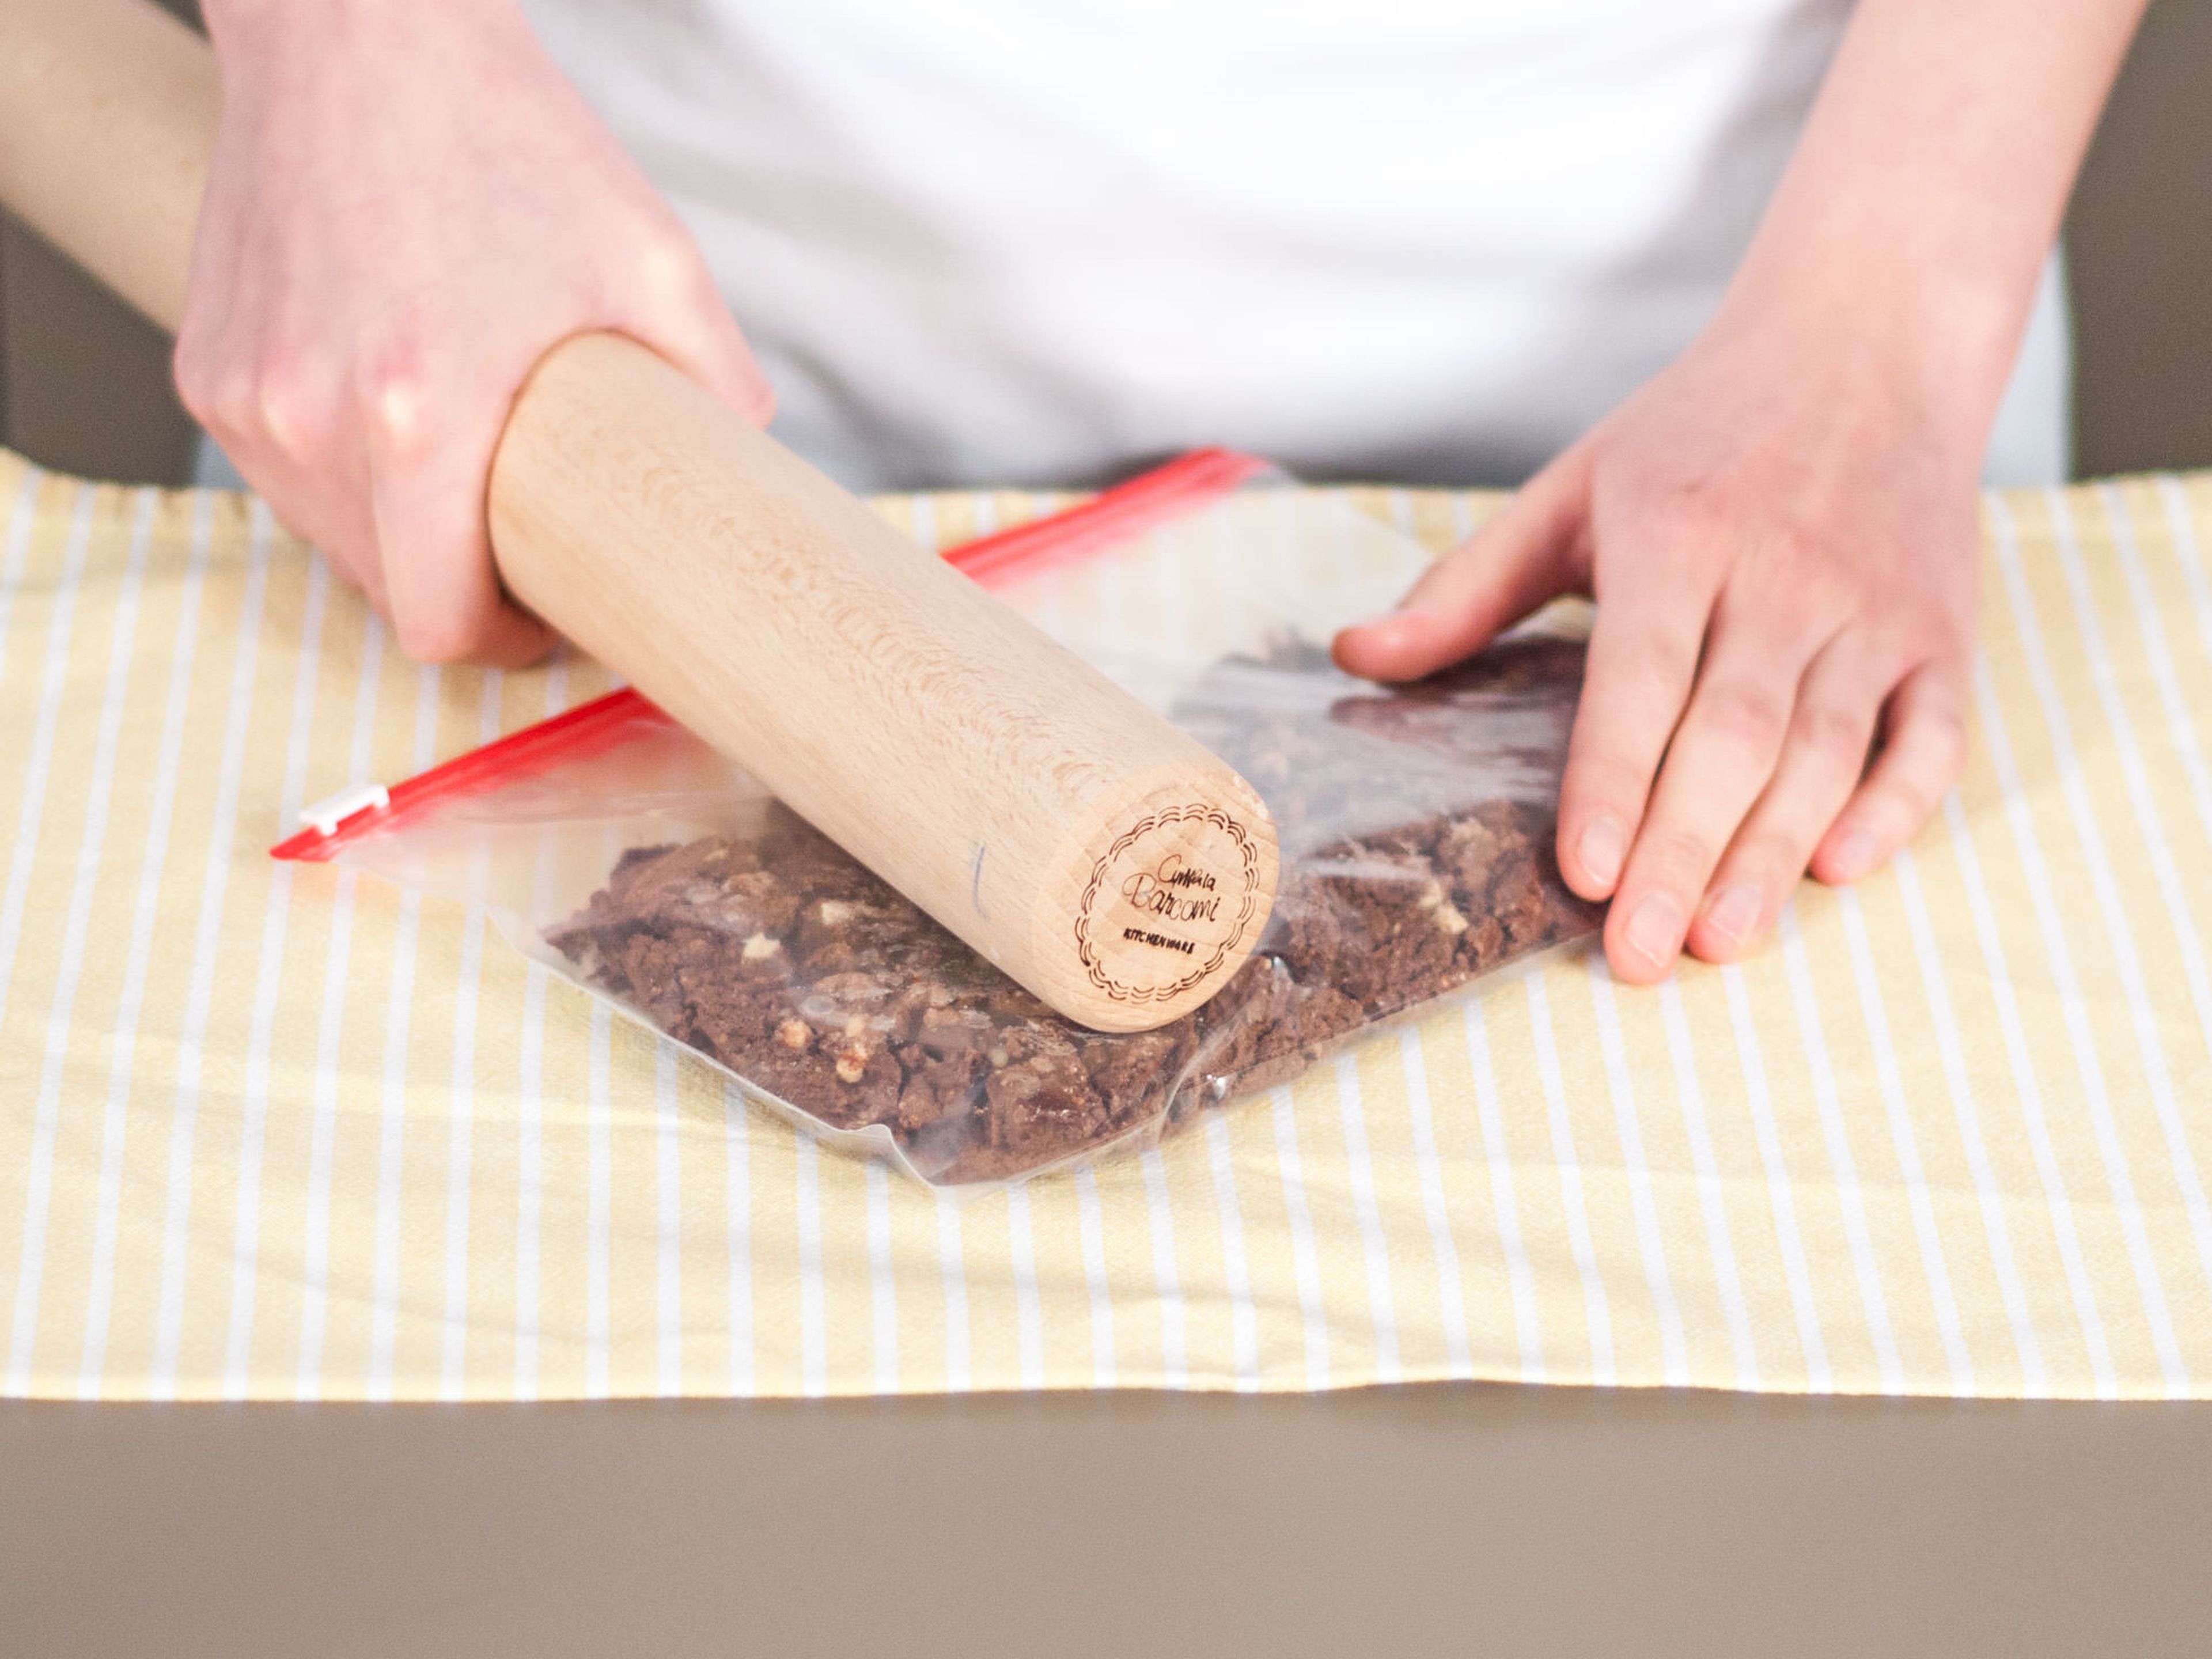 Place cookies into a freezer bag. Tightly seal bag and crush cookies with a rolling pin.